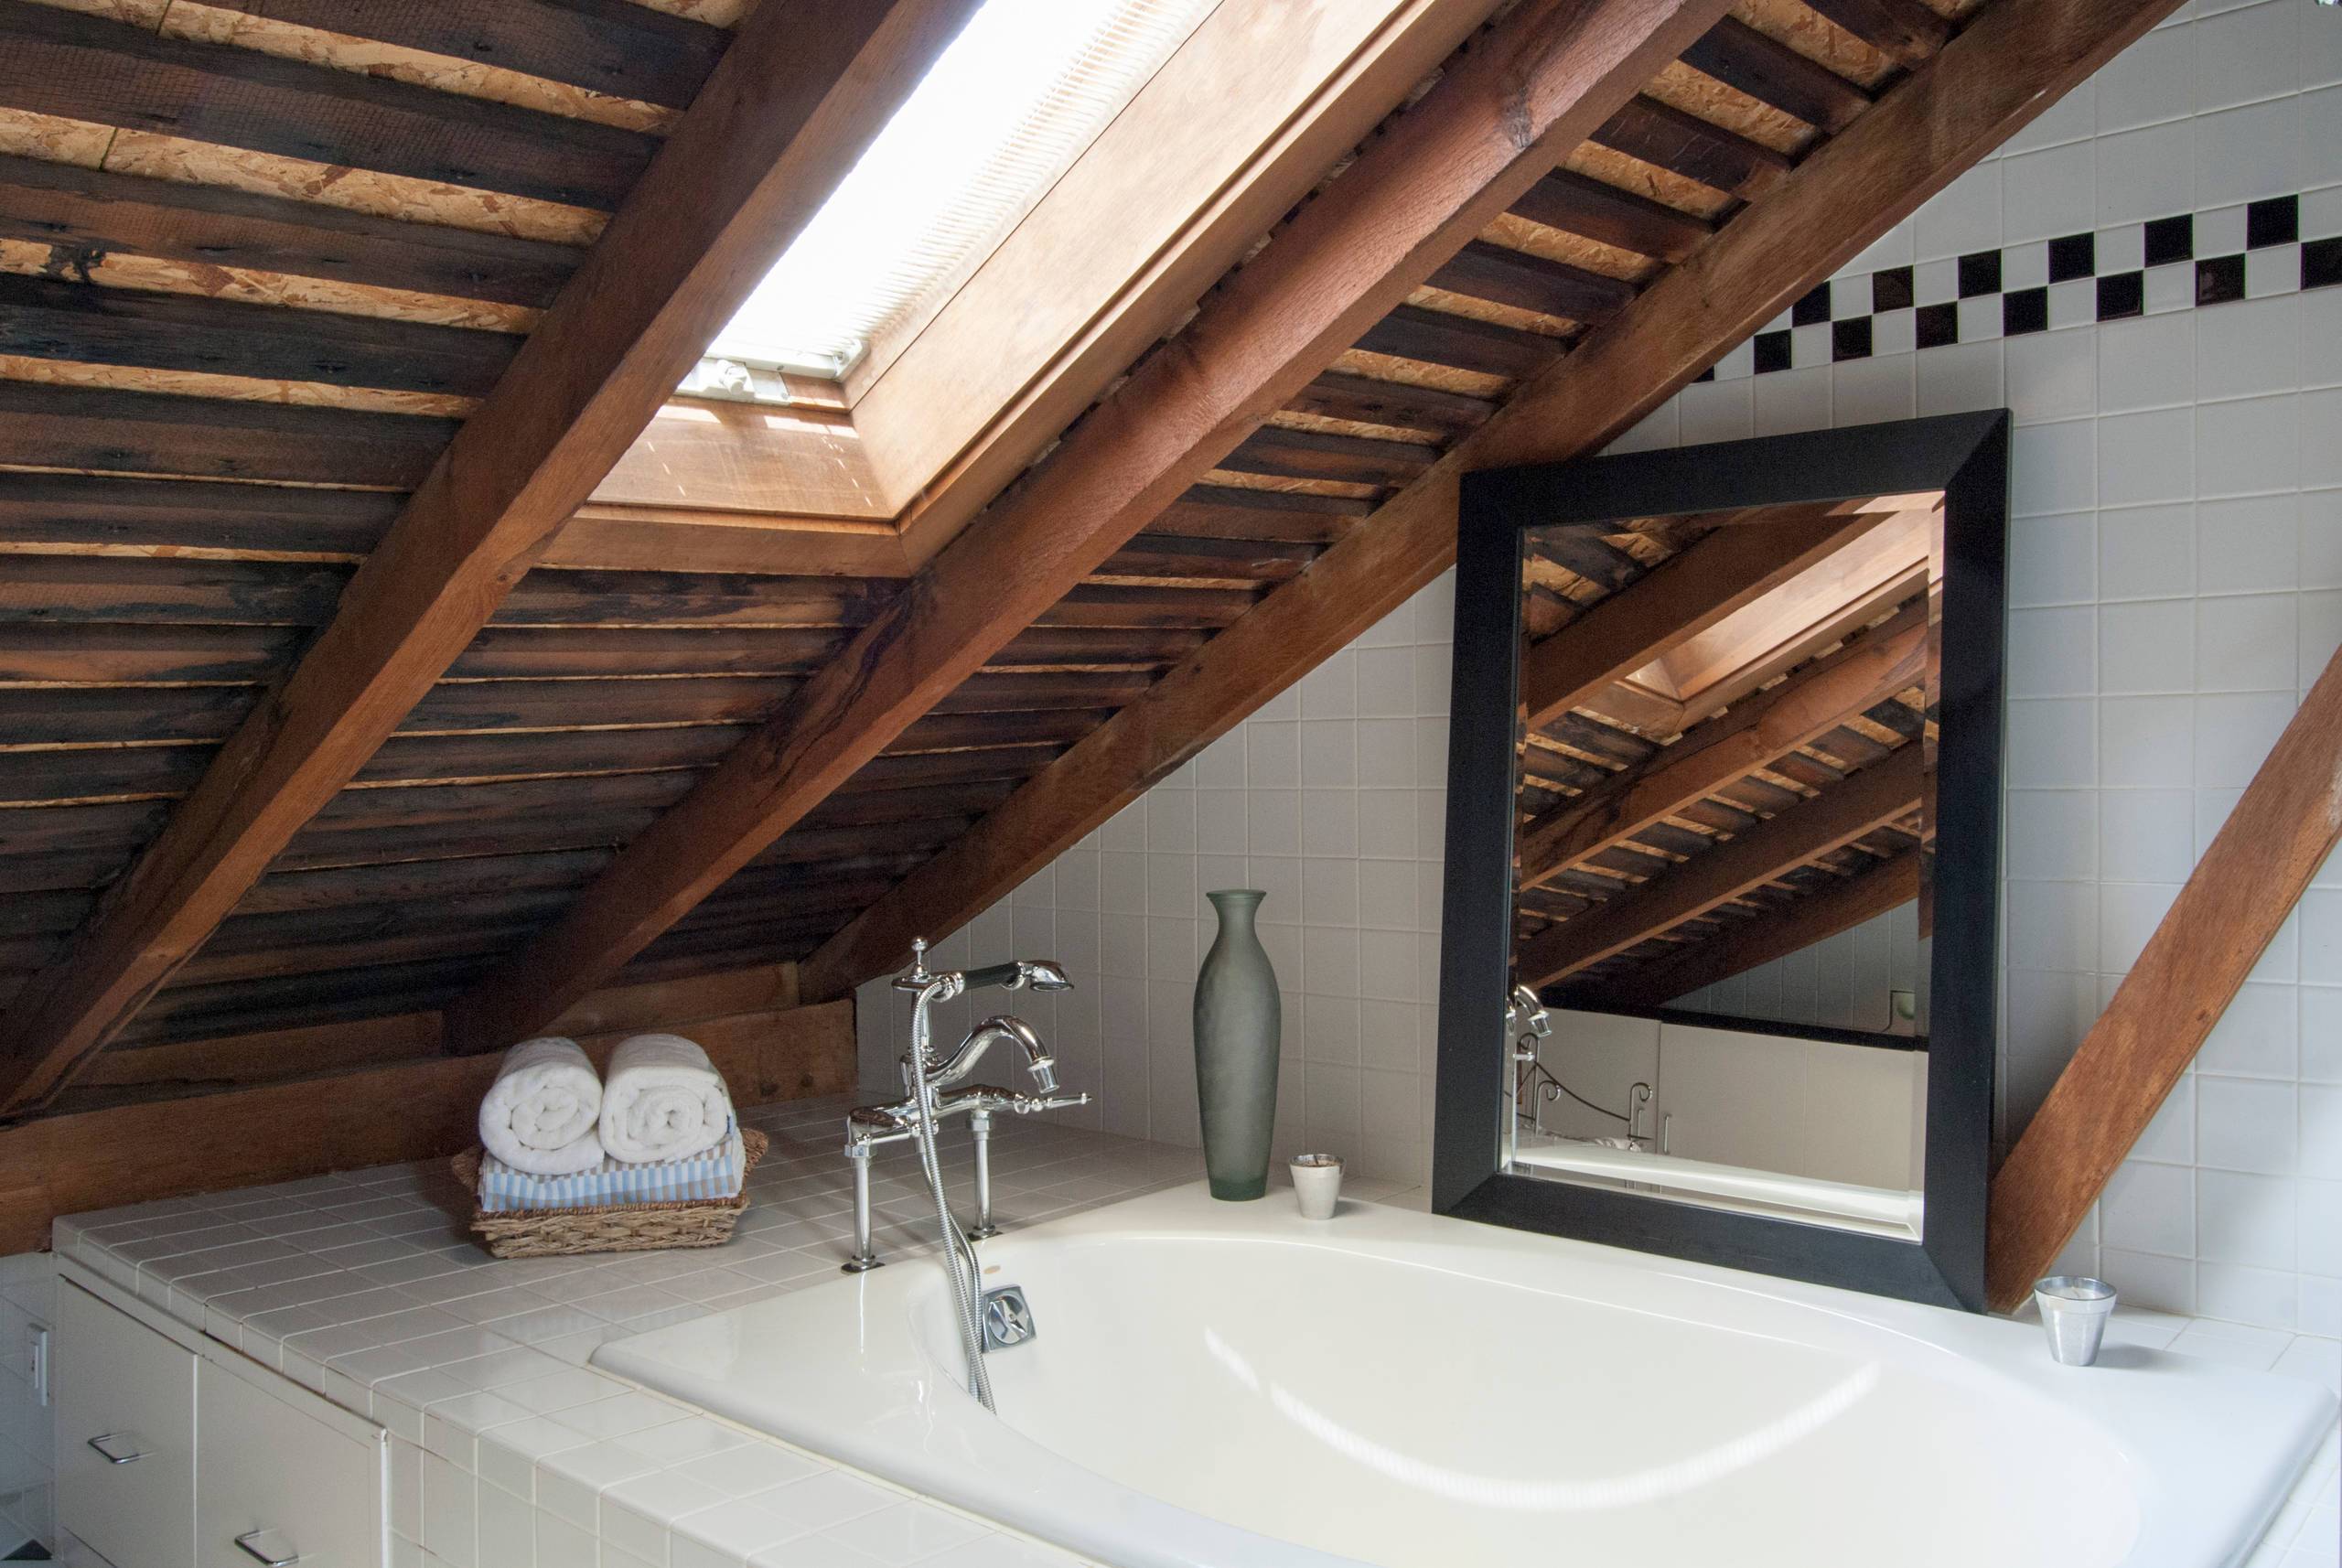 A sloped window over a tub for relaxing vibe (from Houzz)